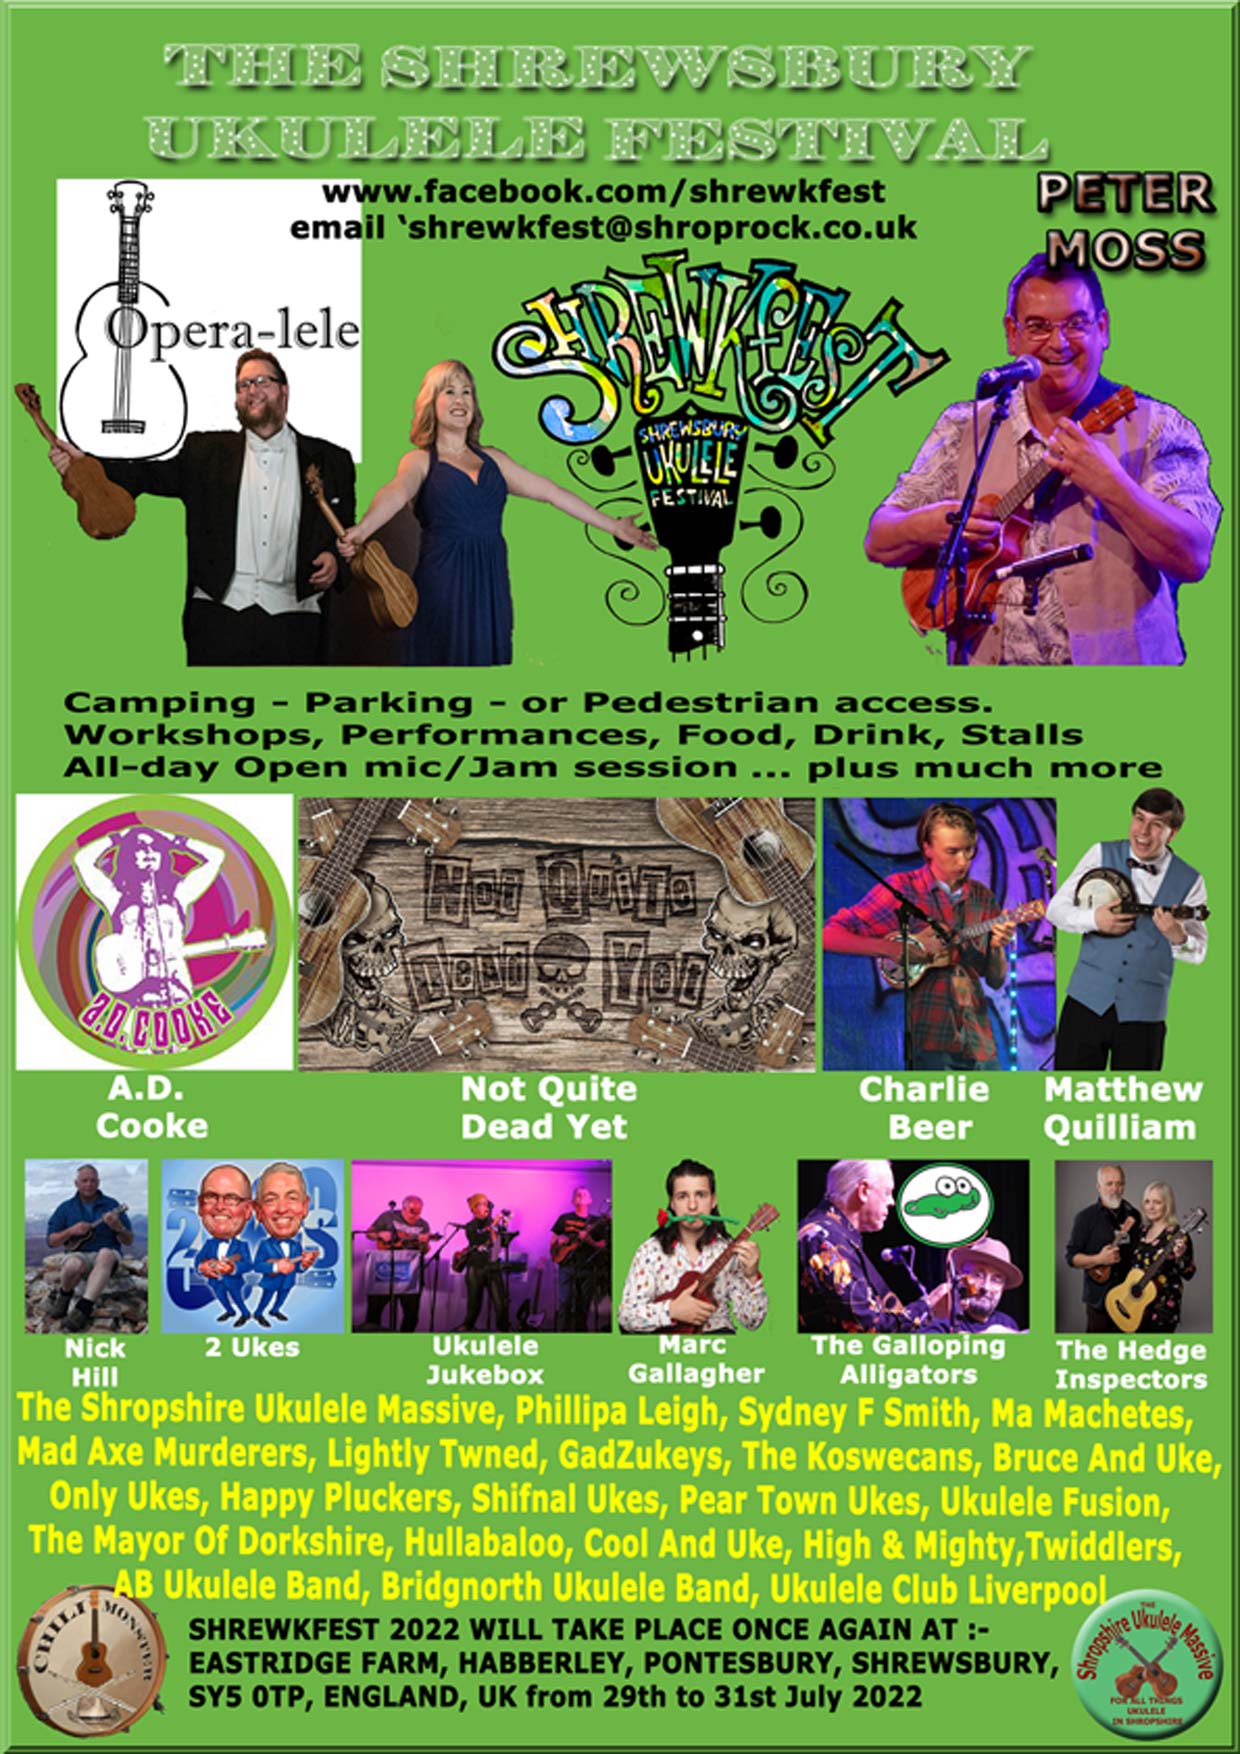 Click Here to go to Shrewkfest 2019 Info page